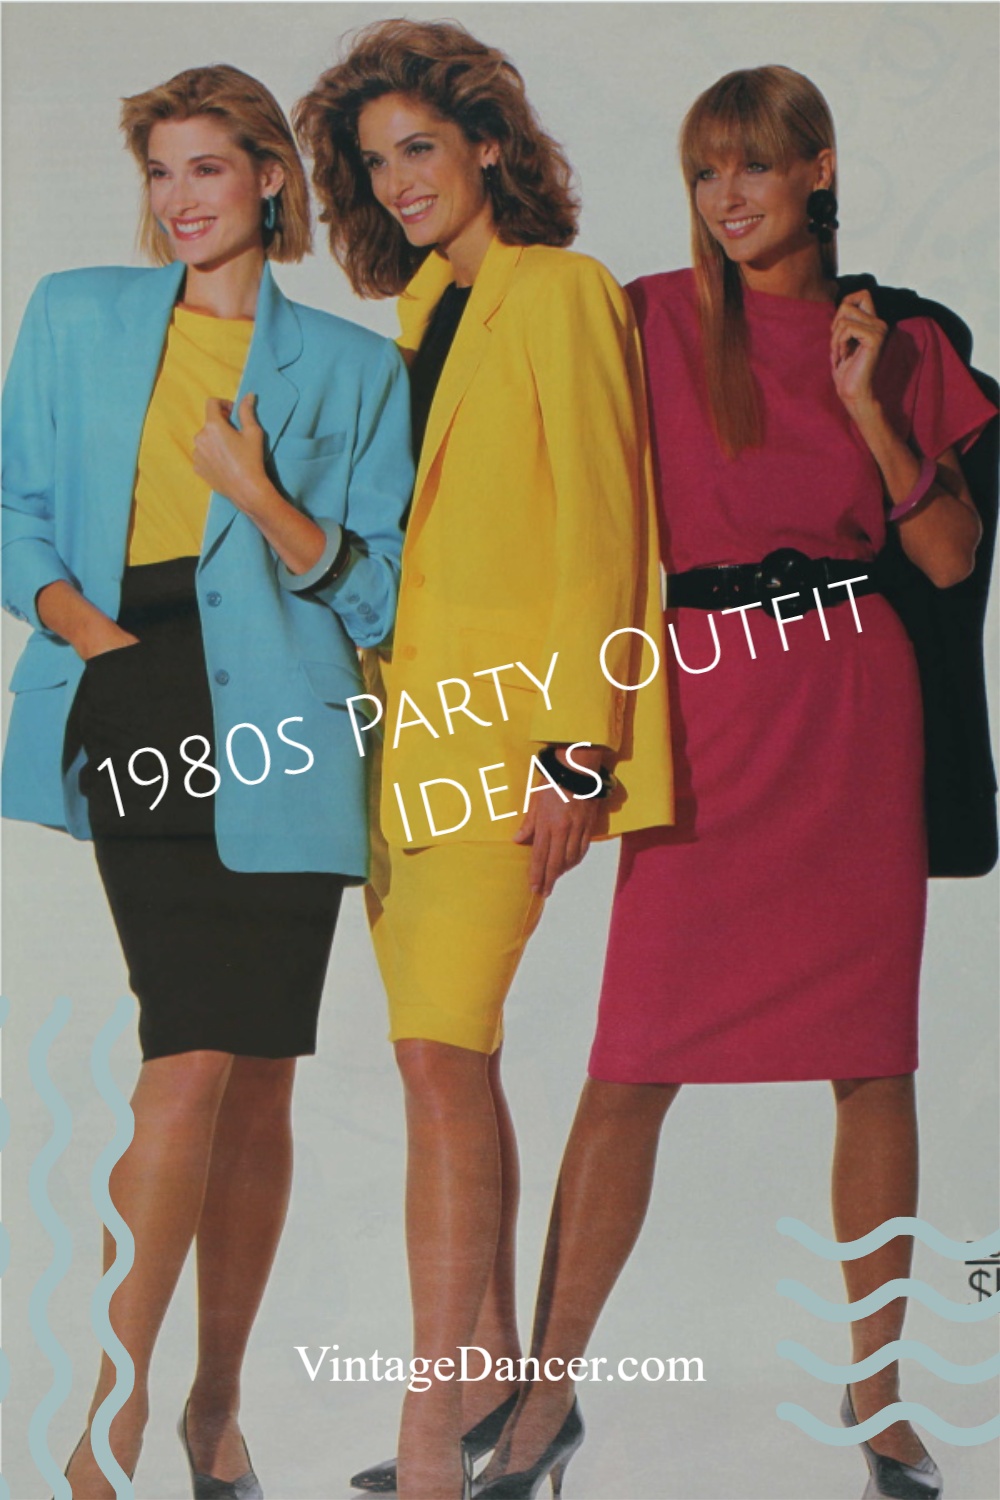 1980s Party Outfit Ideas for Girls, Guys and Couples